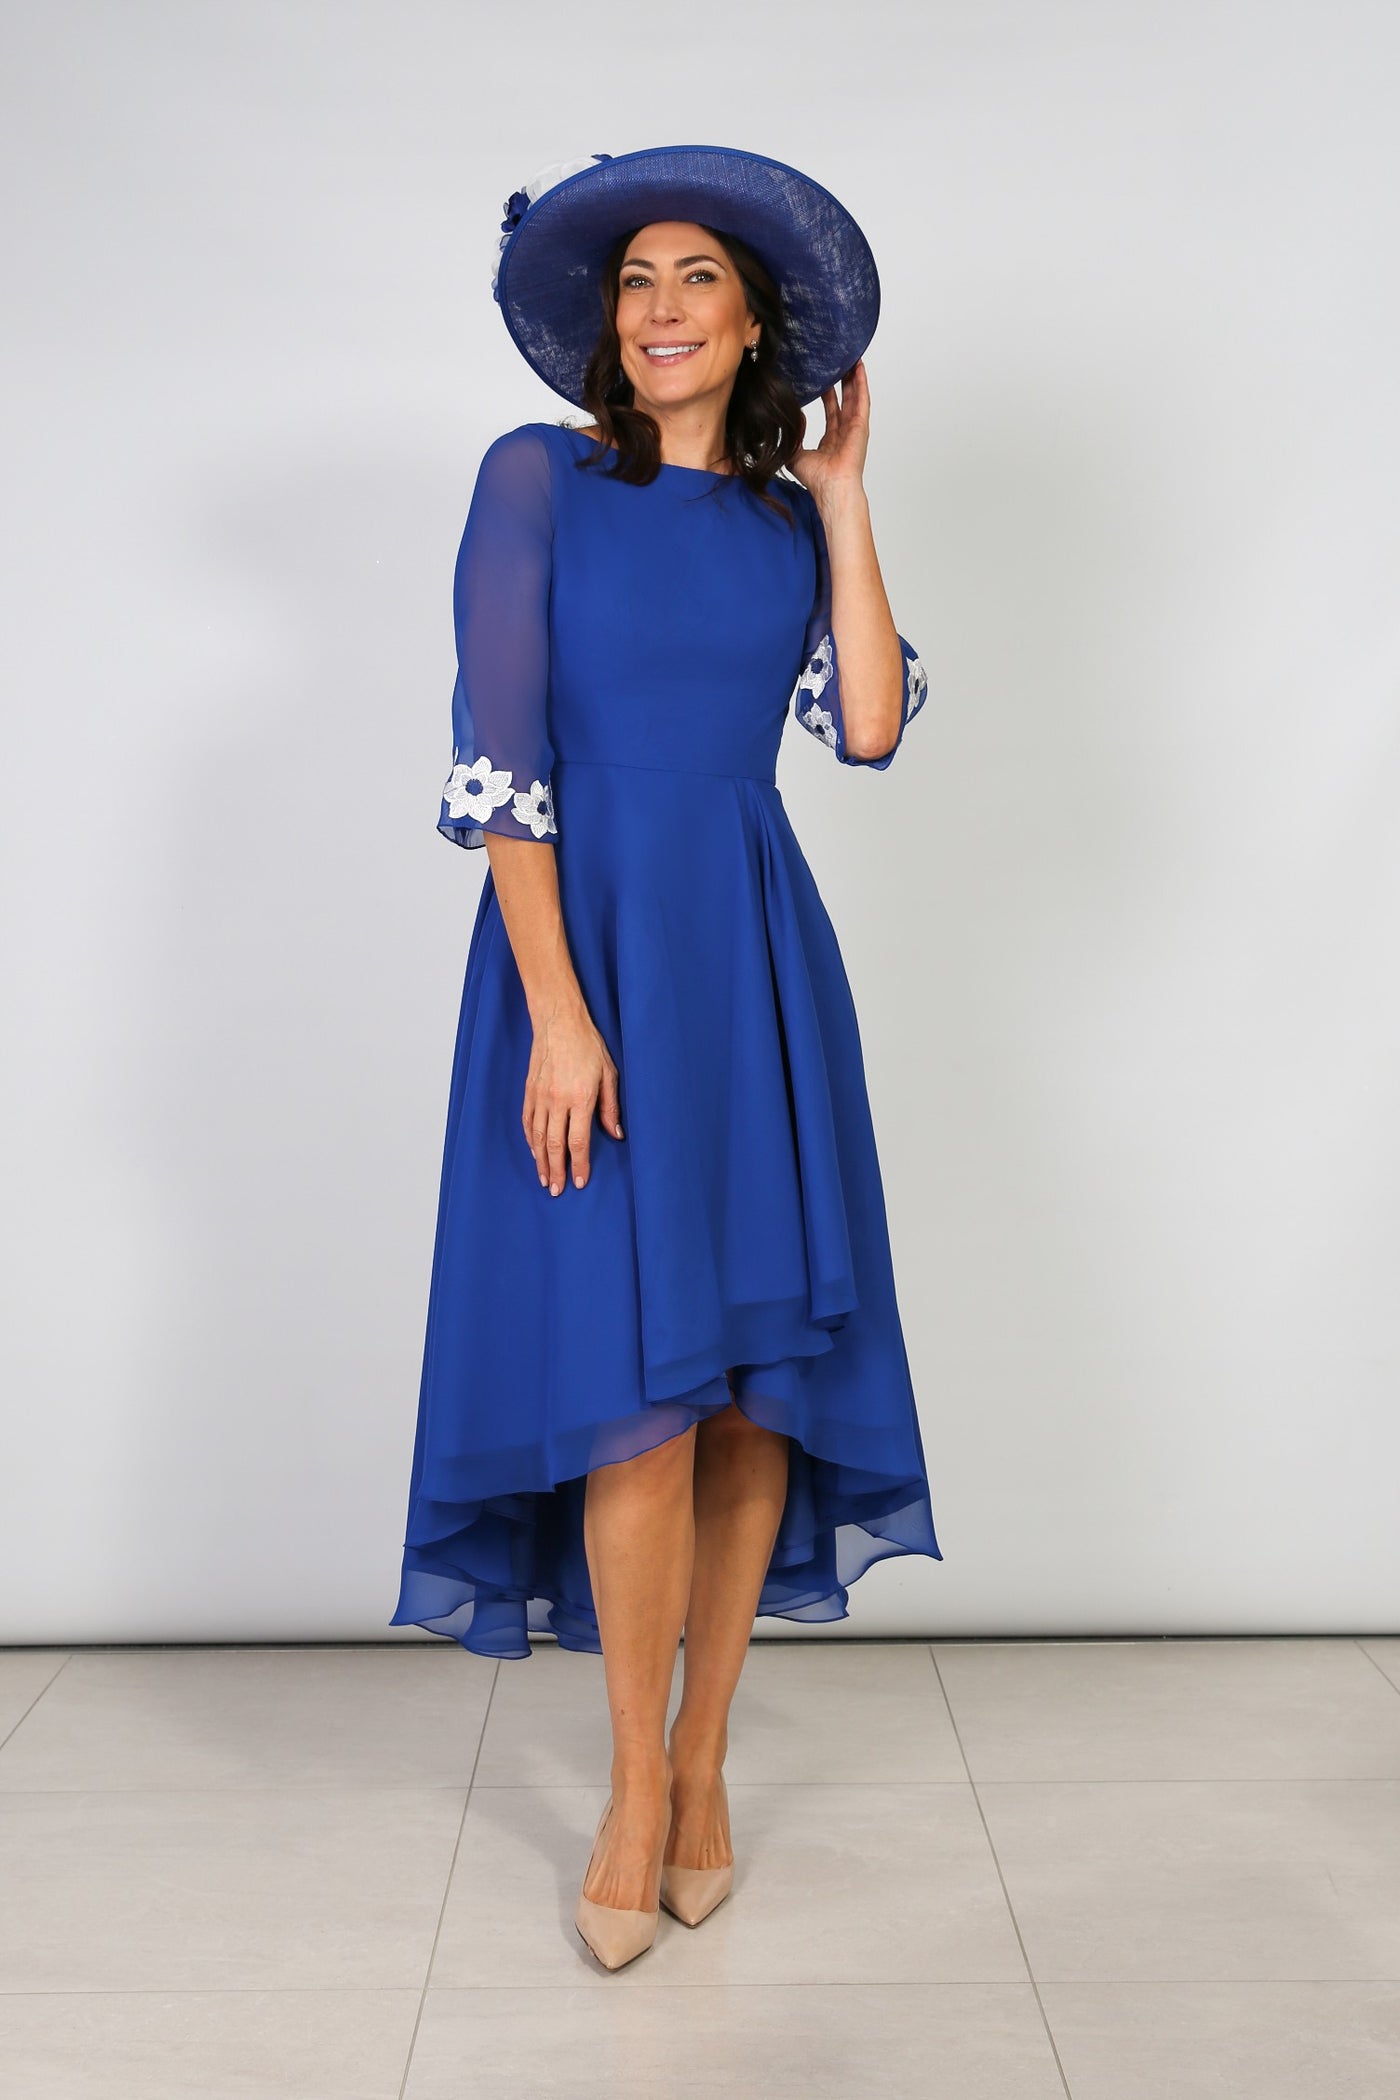 Royal Blue Dress 3/4 Mesh Sleeve With Ivory Flowers And Wrap Skirt Detailing